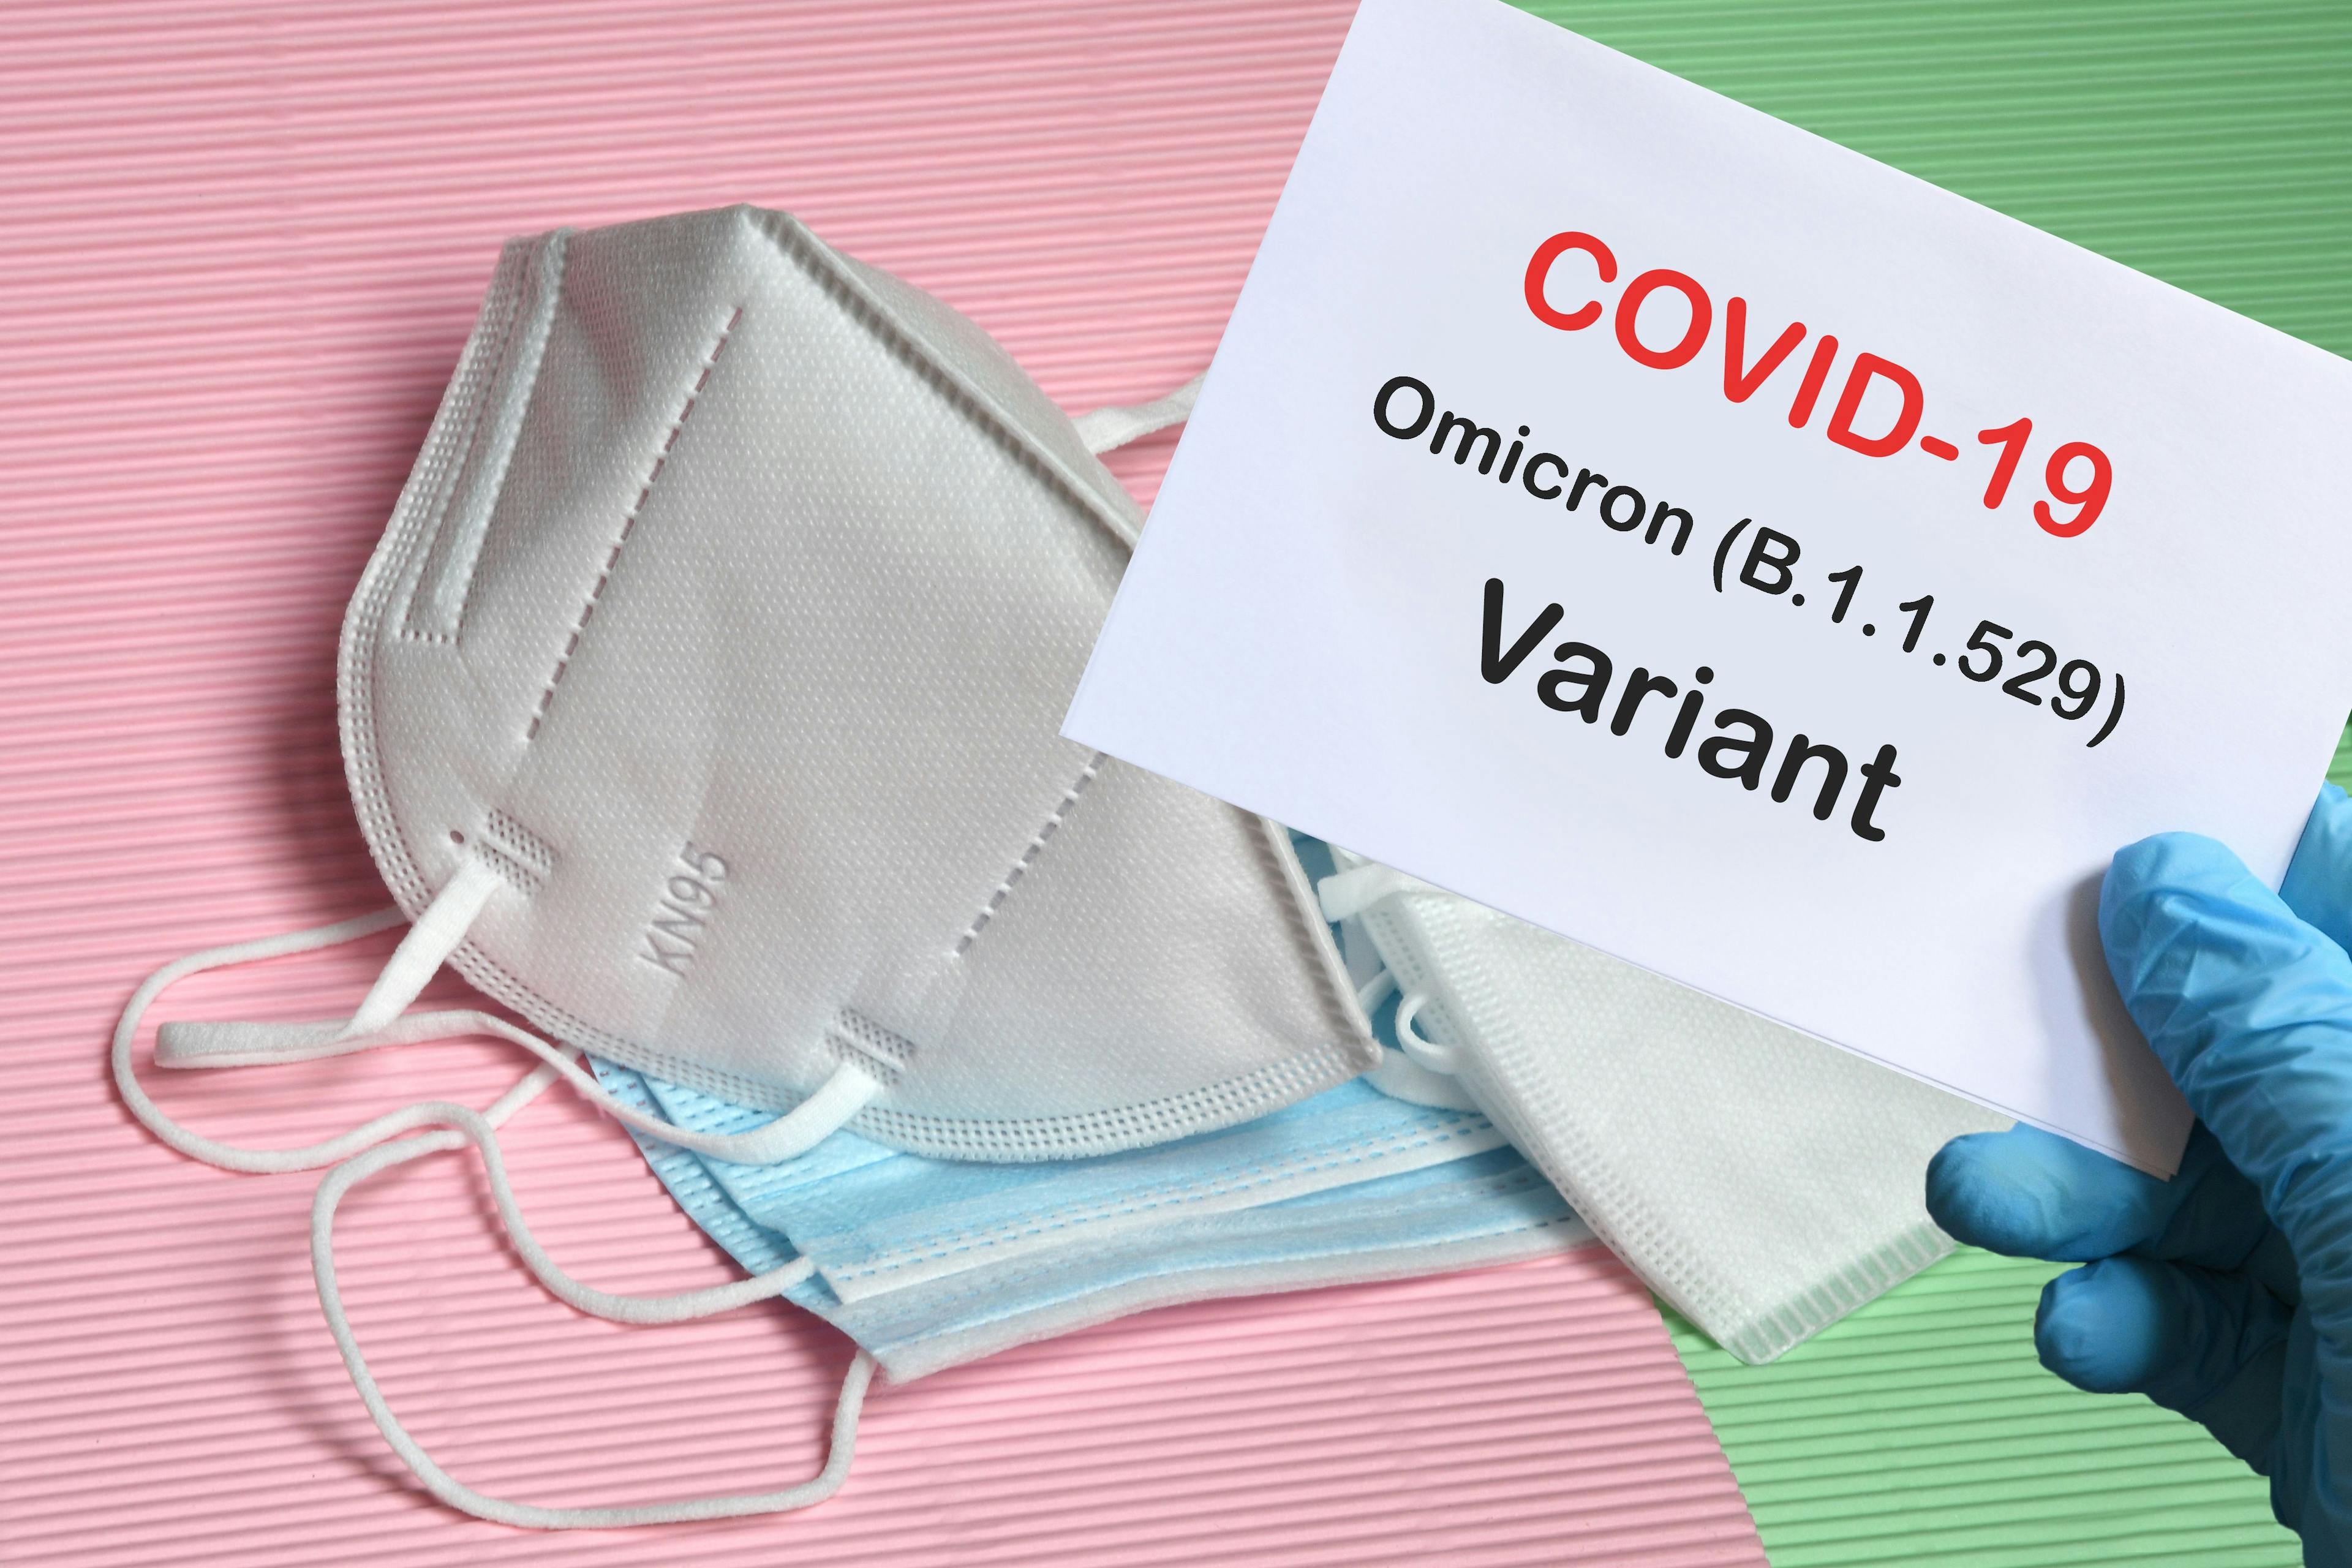 What you need to know right now about the COVID-19 Omicron variant